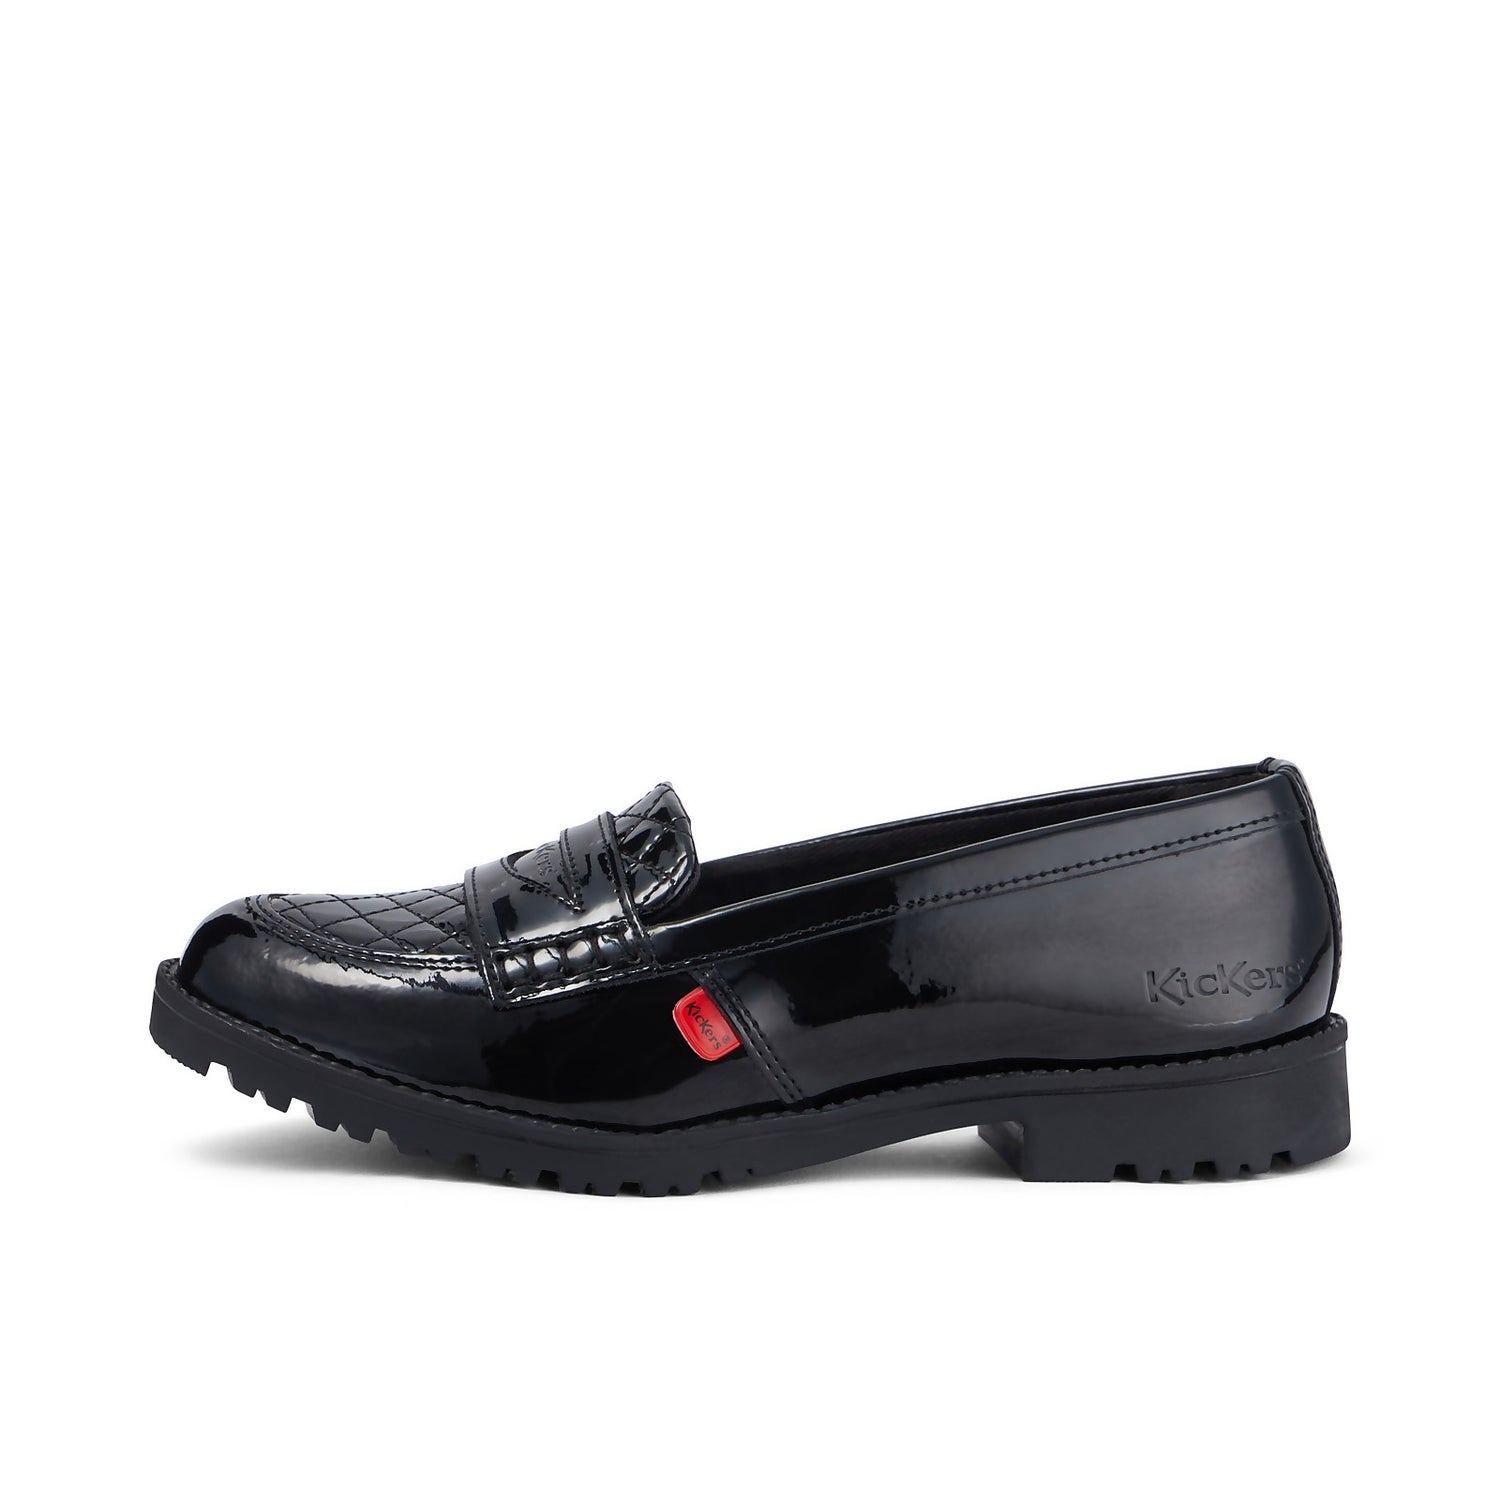 Kickers Lachly Loafer Youth Girls Other Leather Material School Shoes Black 